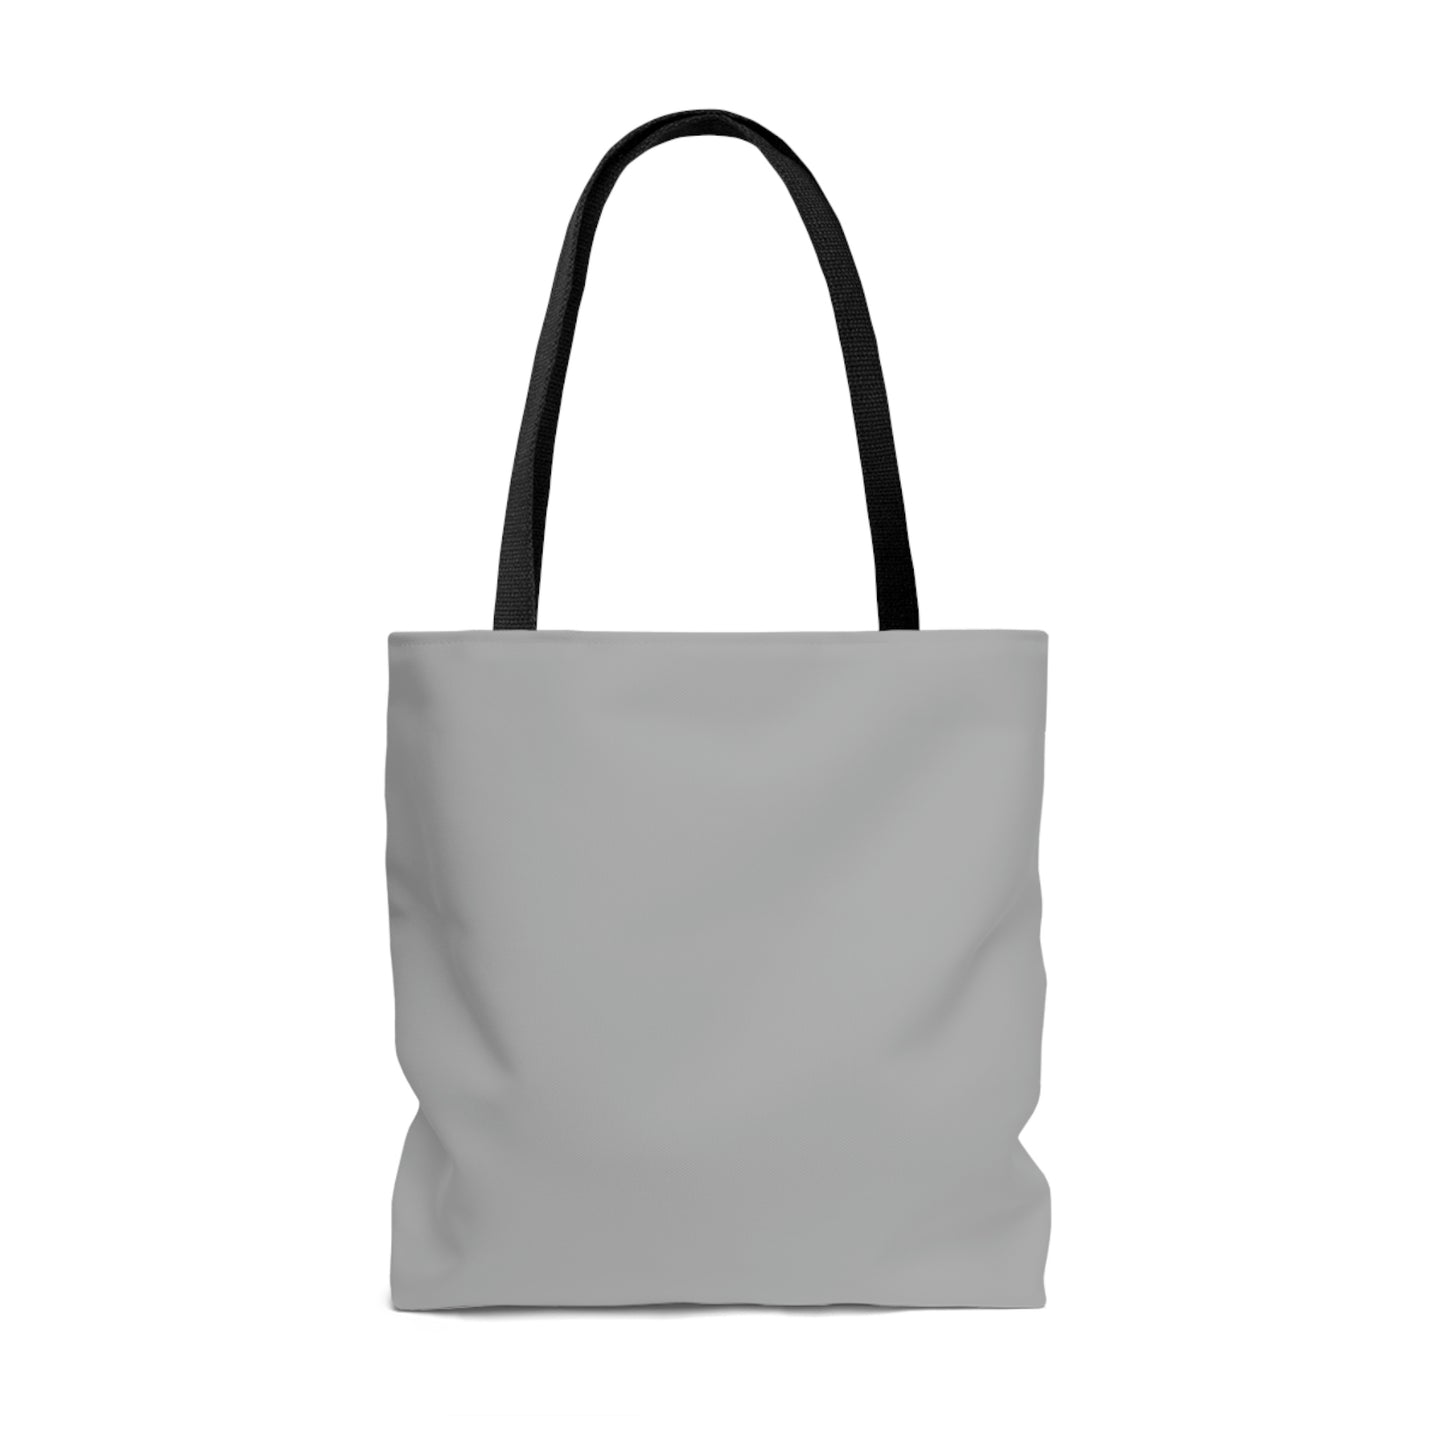 Living Proof That God Answers Prayers Tote Bag